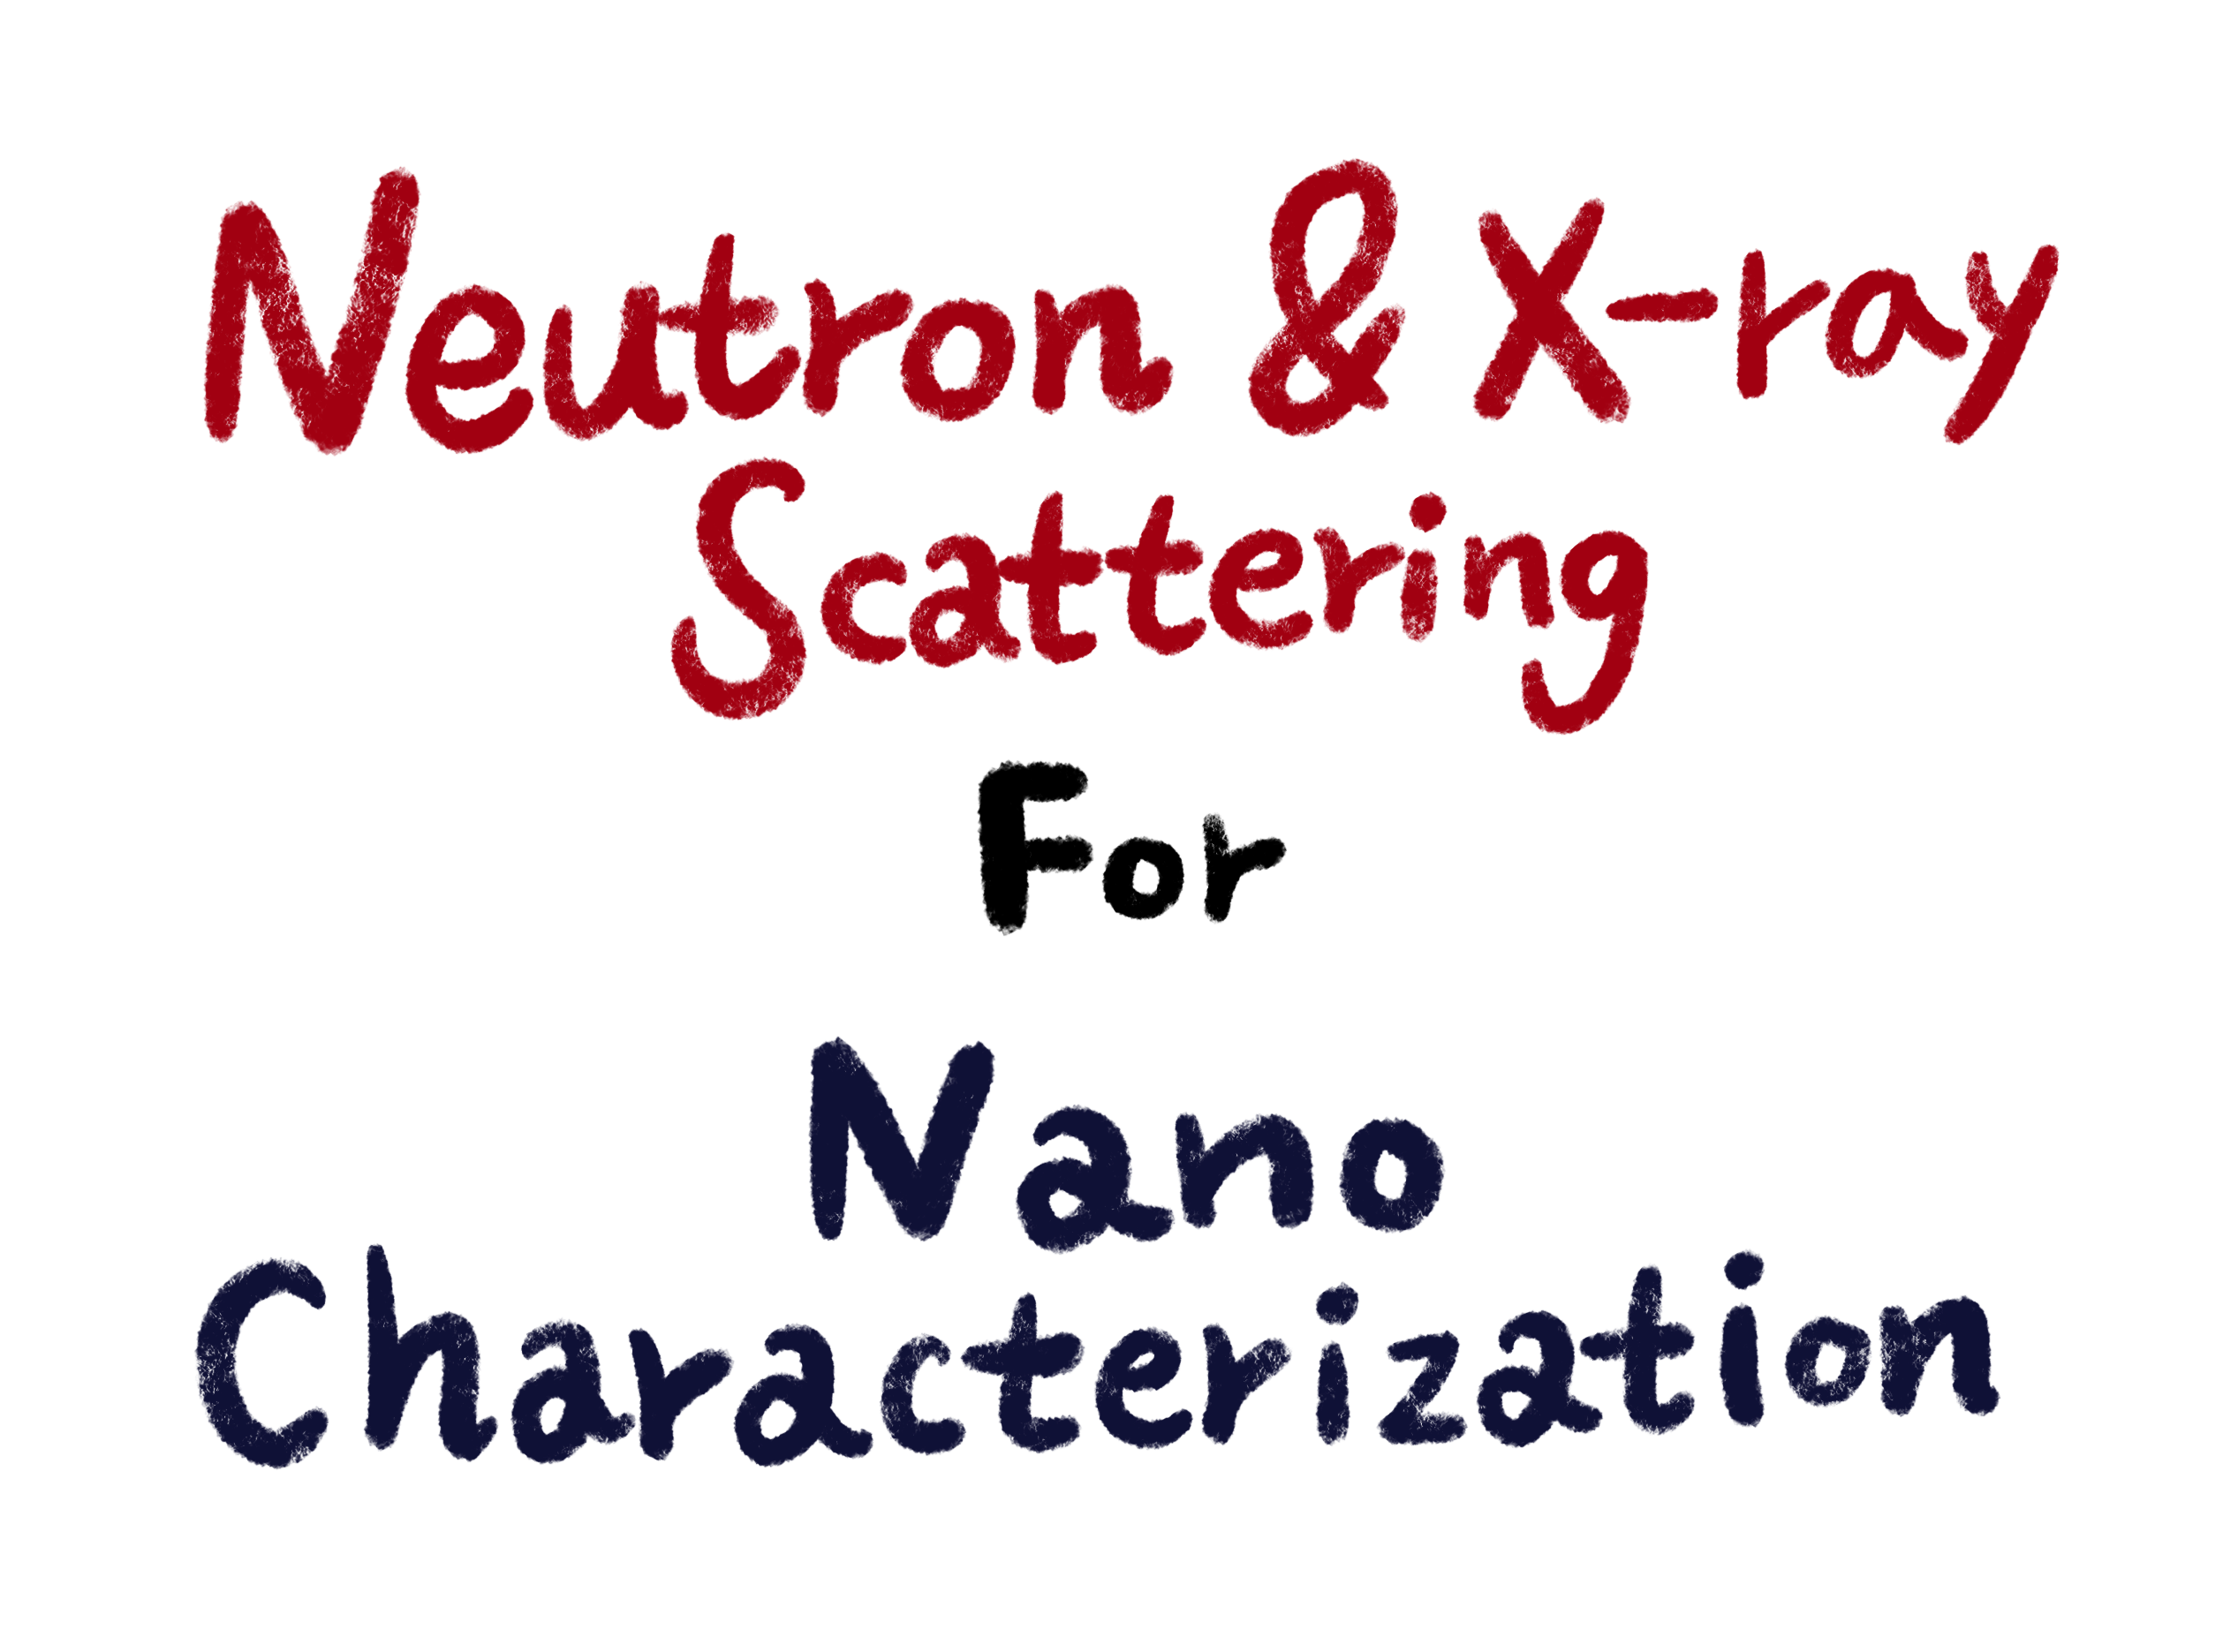 neutron&x-ray scattering